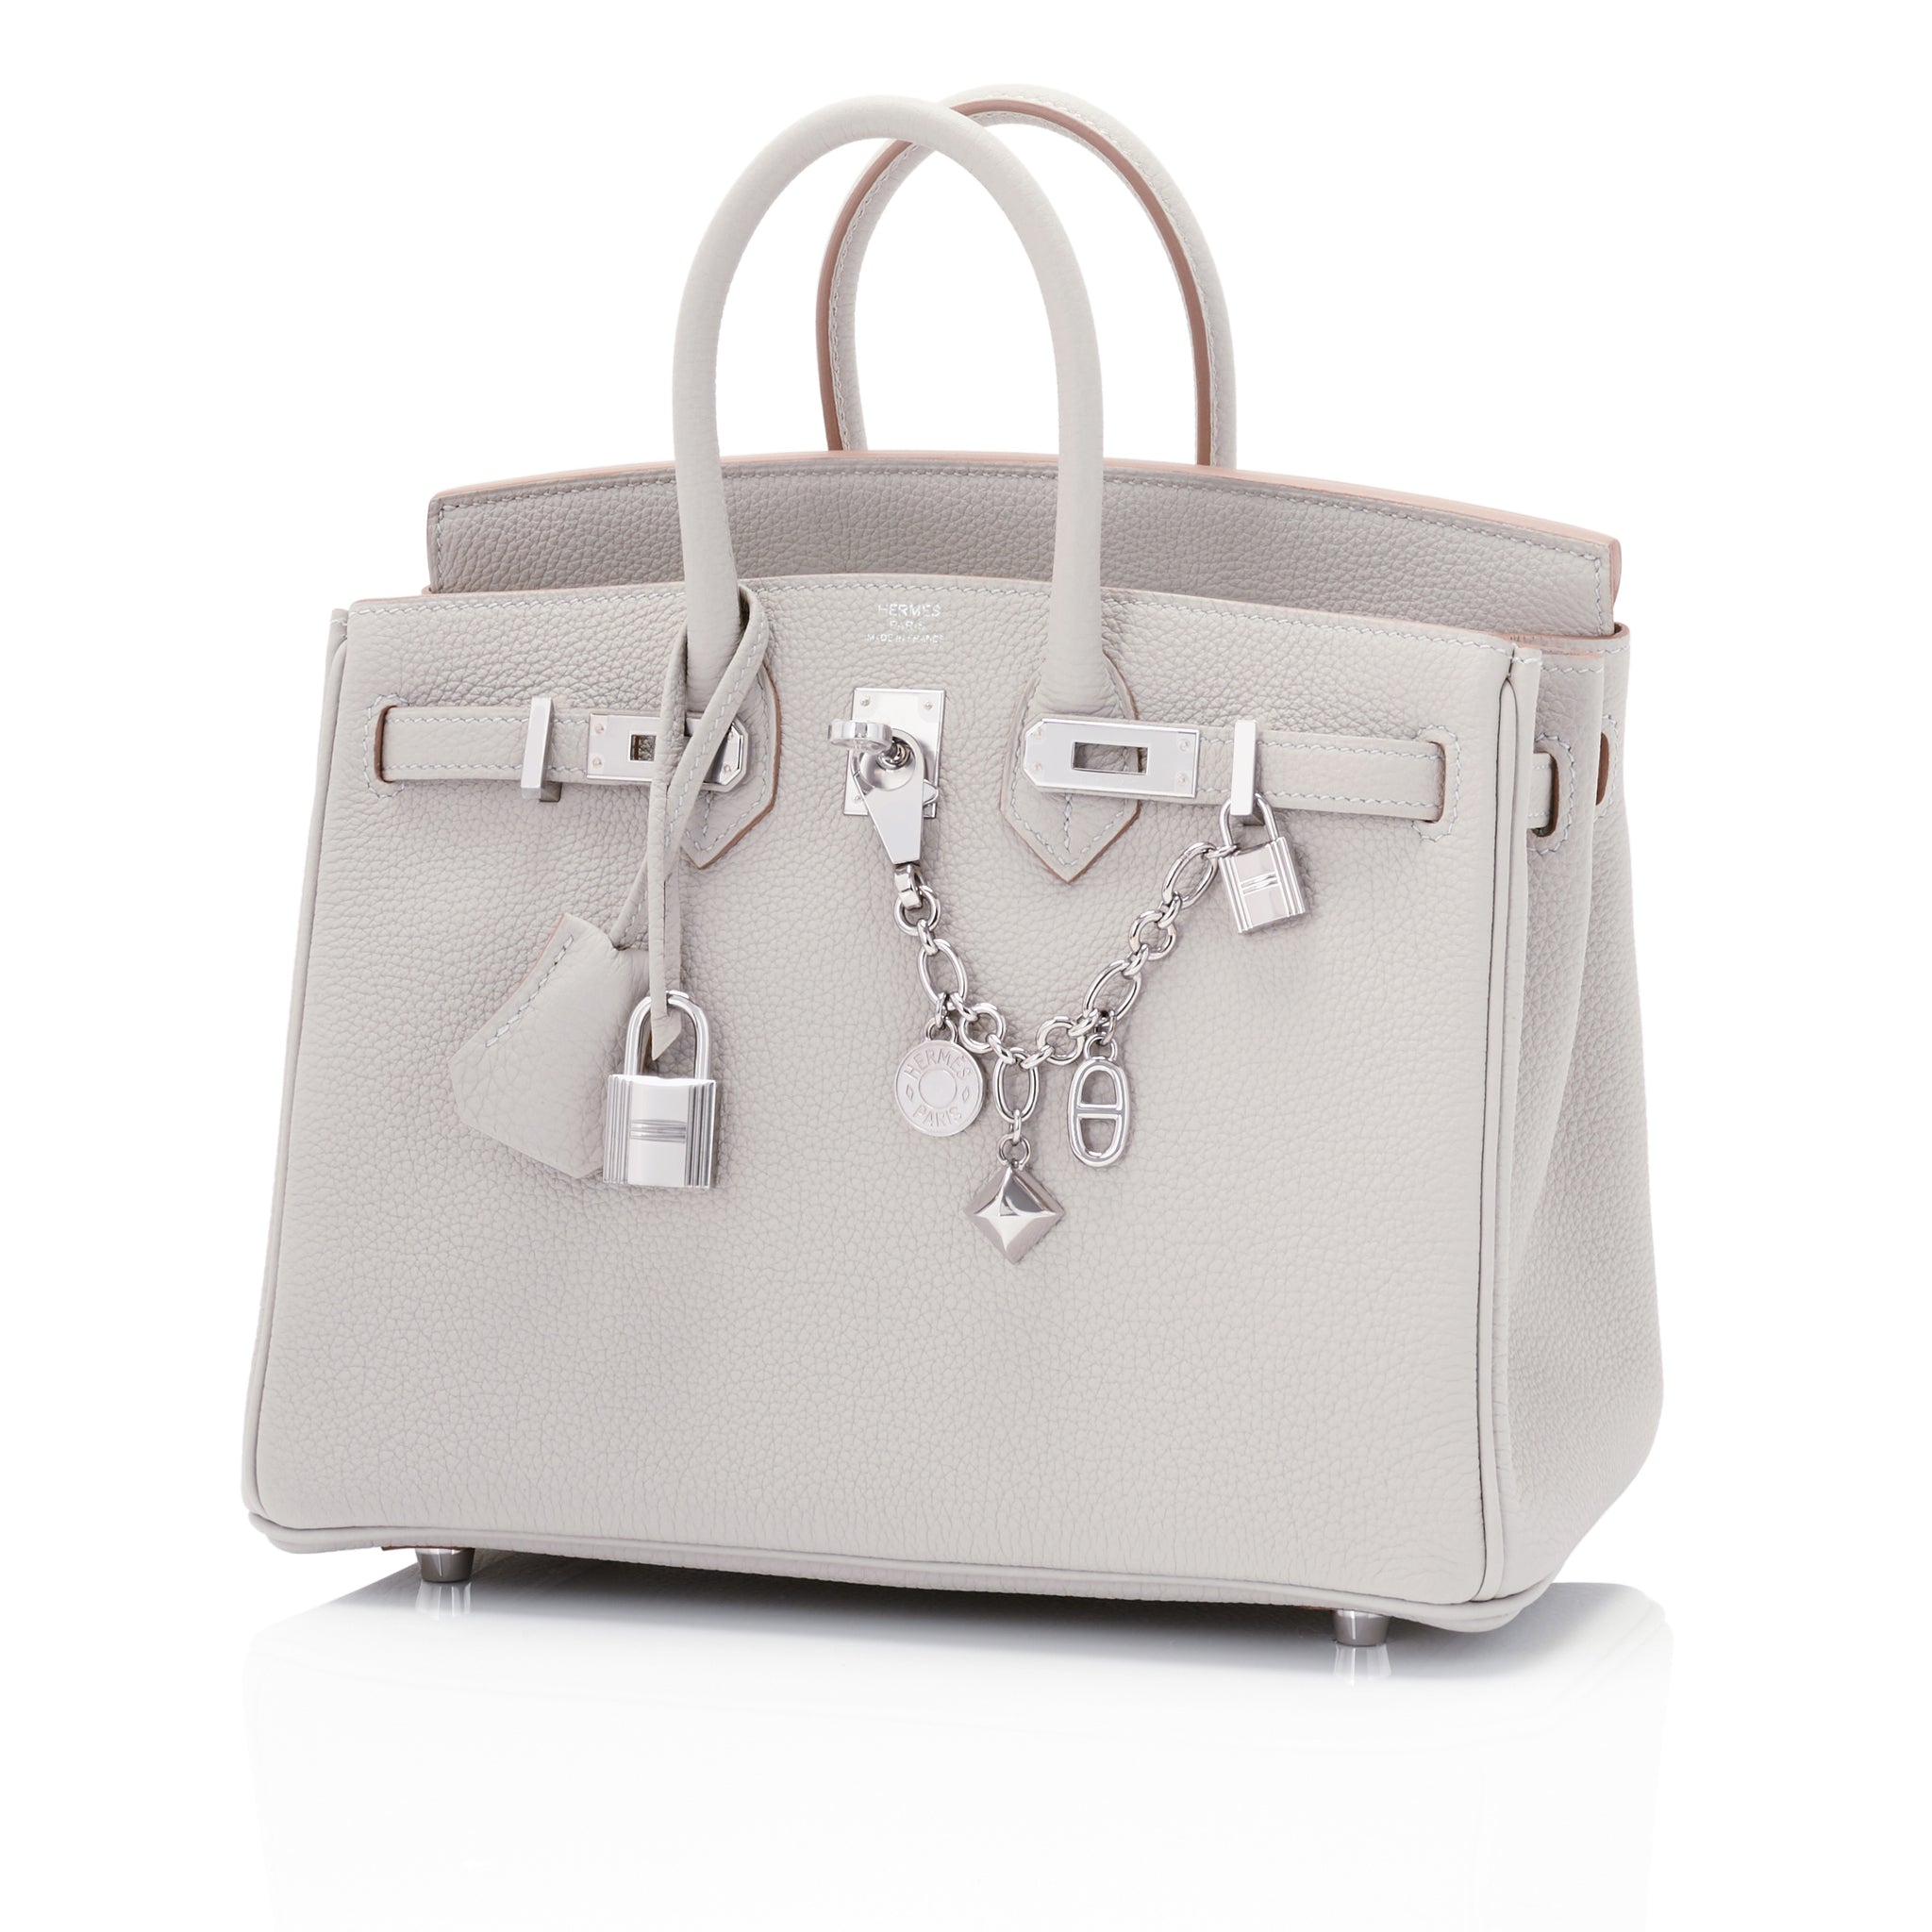 HERMÈS Birkin 25 handbag in Gris Pale Togo leather with Palladium hardware  [Consigned]-Ginza Xiaoma – Authentic Hermès Boutique